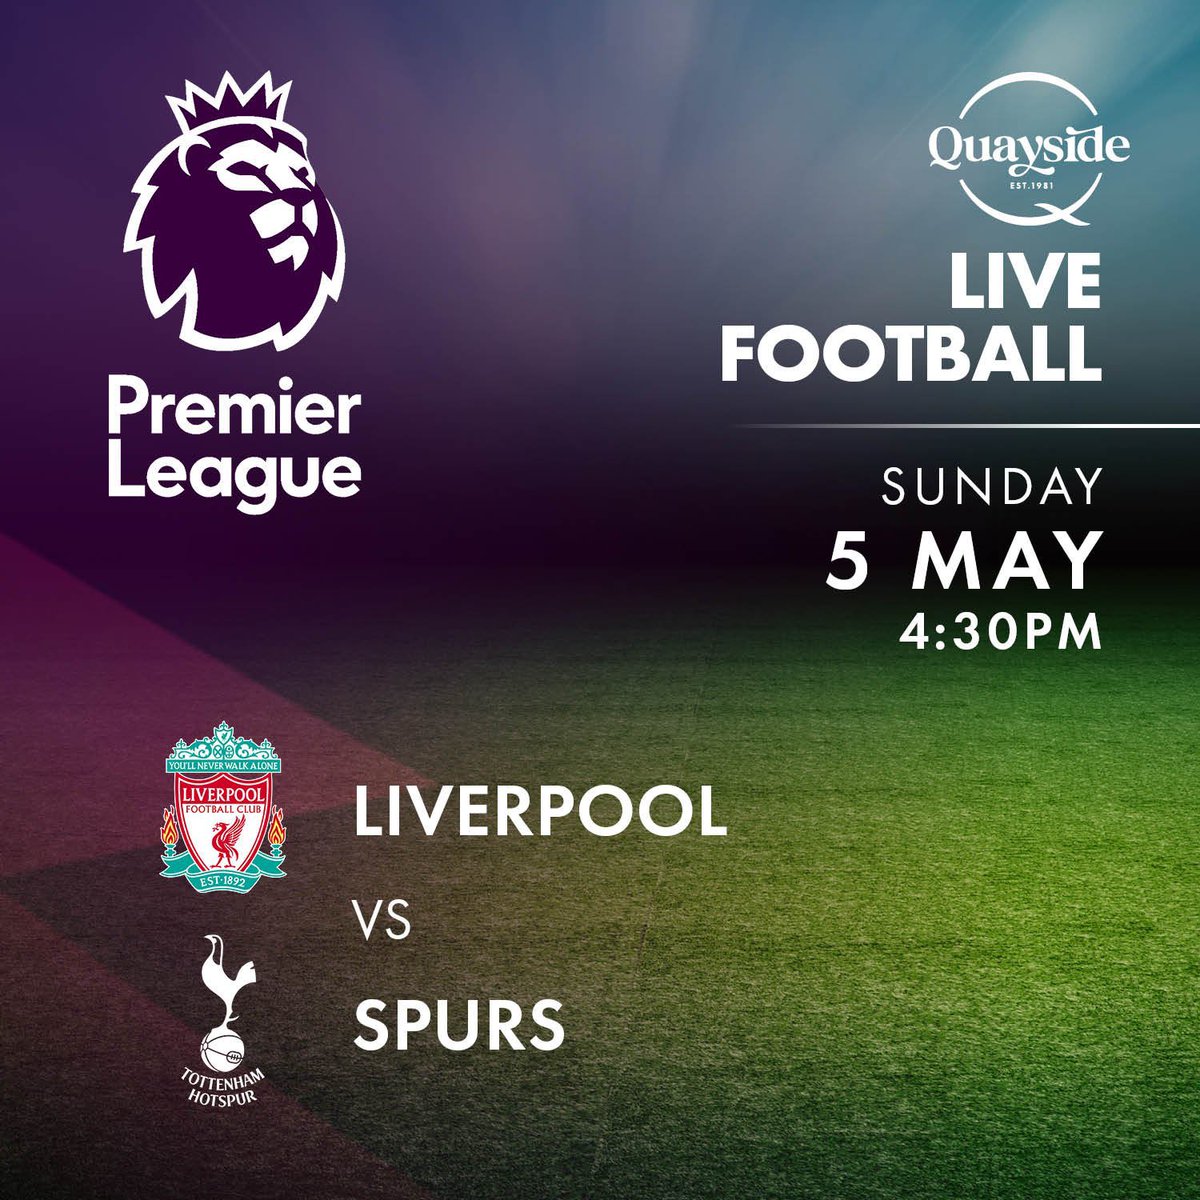 Predict the Correct Score. 

Liverpool VS Tottenham 

End of Predictions 4:30PM.

A winner will be picked at random for N2500.

Tag 2 people. 

You must be following and repost to Win.

GoodLuck!